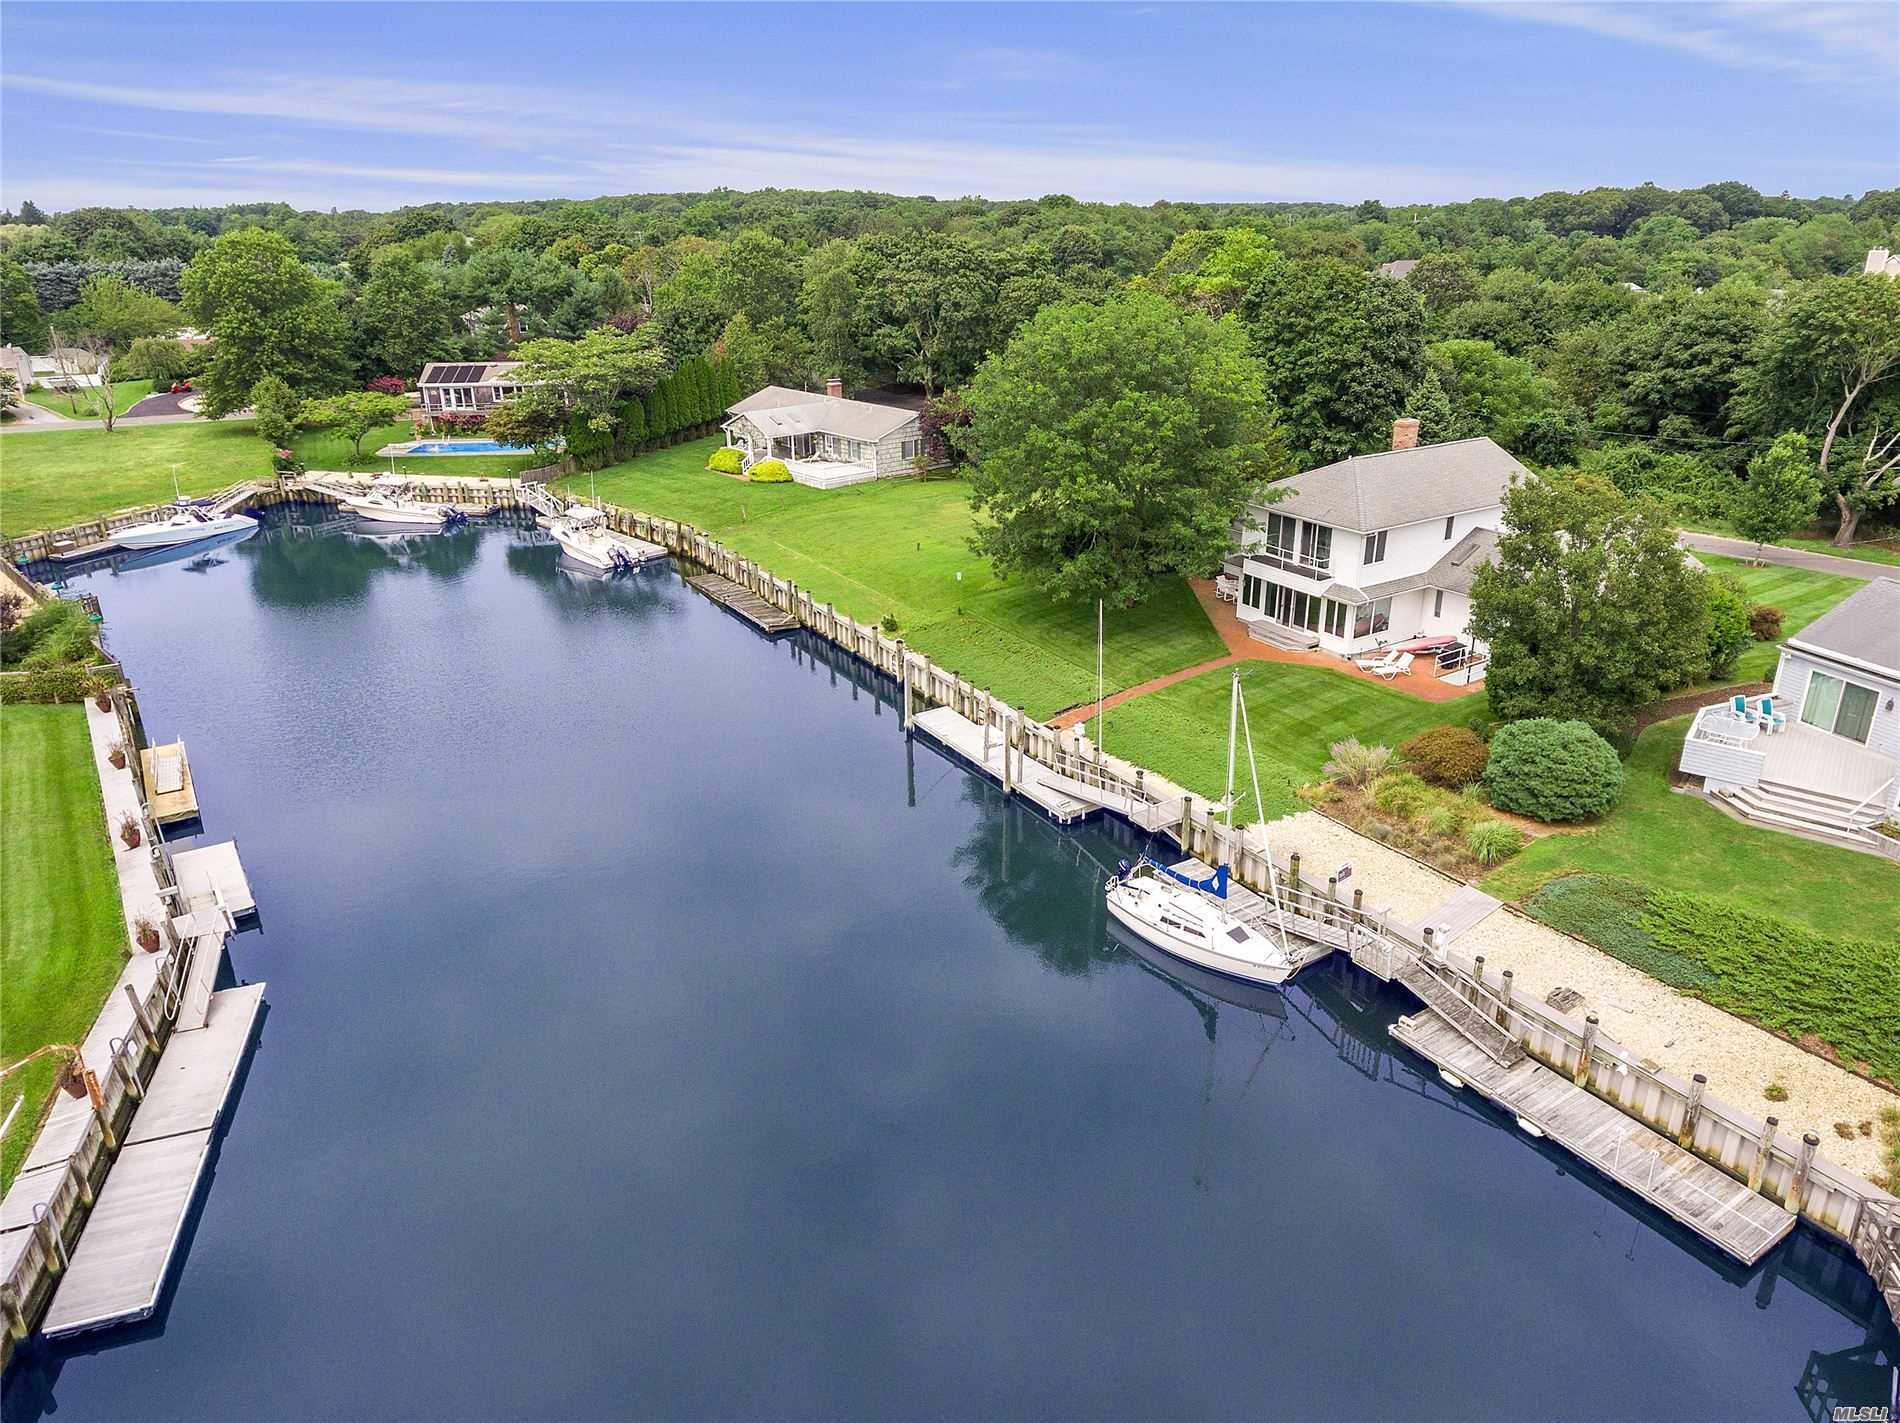 Come to Cleaves Point and see your new home, perfectly positioned on Gull Pond, with direct access to Peconic Bay. Keep your 60&rsquo; plus boat at your private floating dock, w/ elec & water, right outside your door! Surely enough room for you to summer with family, friends, and more! Home boasts a dockside Great room, newly renovated kitchen, and Master en/Suite. Private Beach community, outside of Greenport Village, on the cusp of East Marion. Private and serene location, nature lover&rsquo;s oasis!